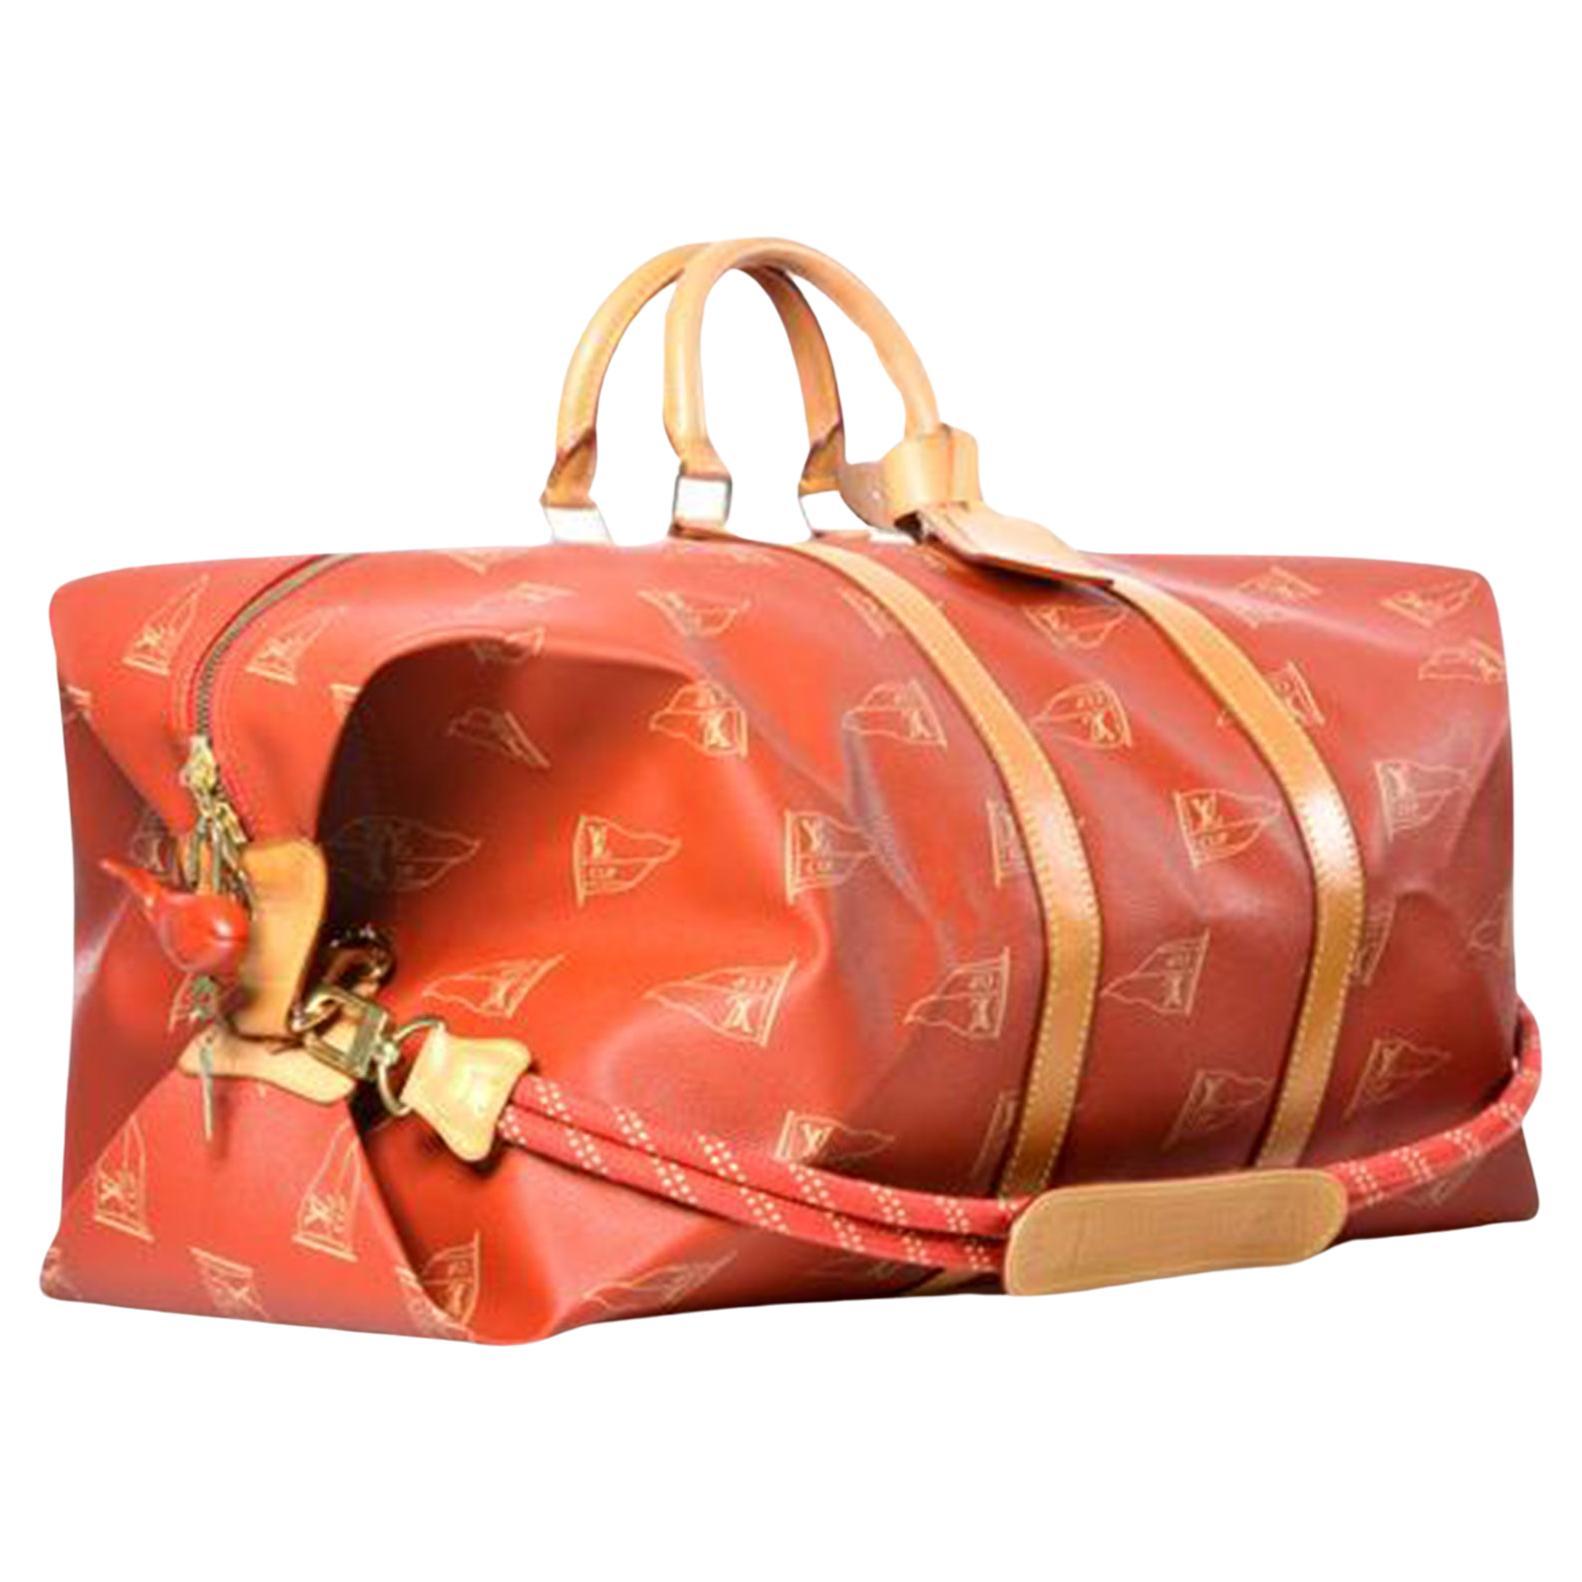 Louis Vuitton Boating Keepall Sailing Duffel Travel Tote